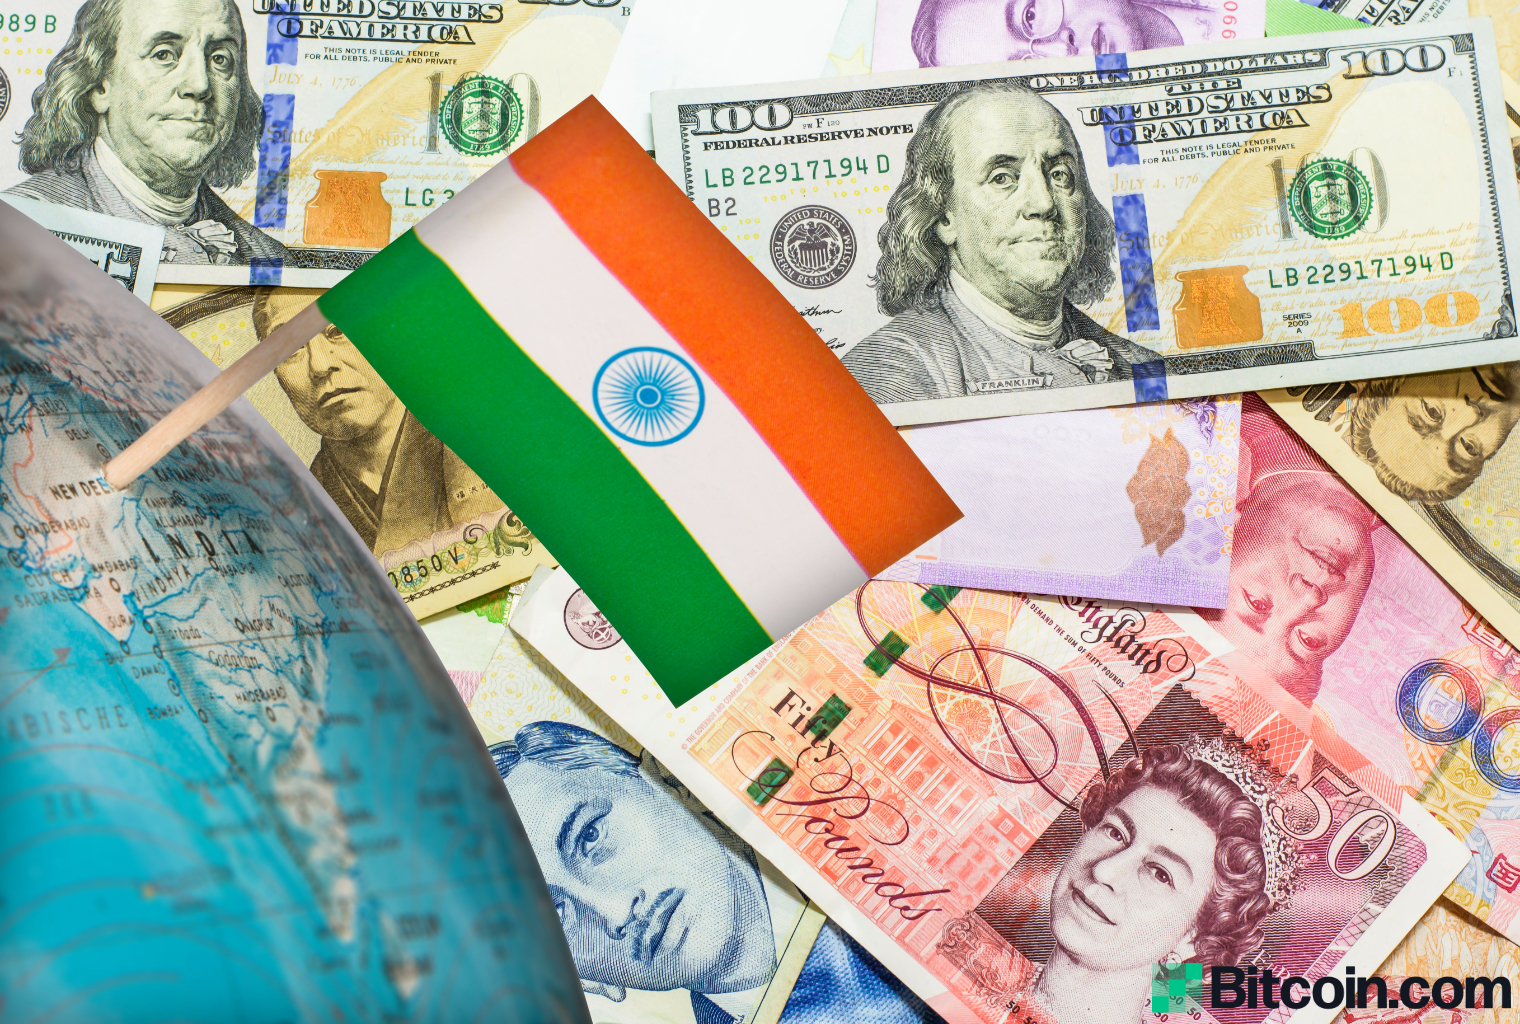 exchanges - How can I convert bitcoins to Indian rupees and vice-versa? - Bitcoin Stack Exchange